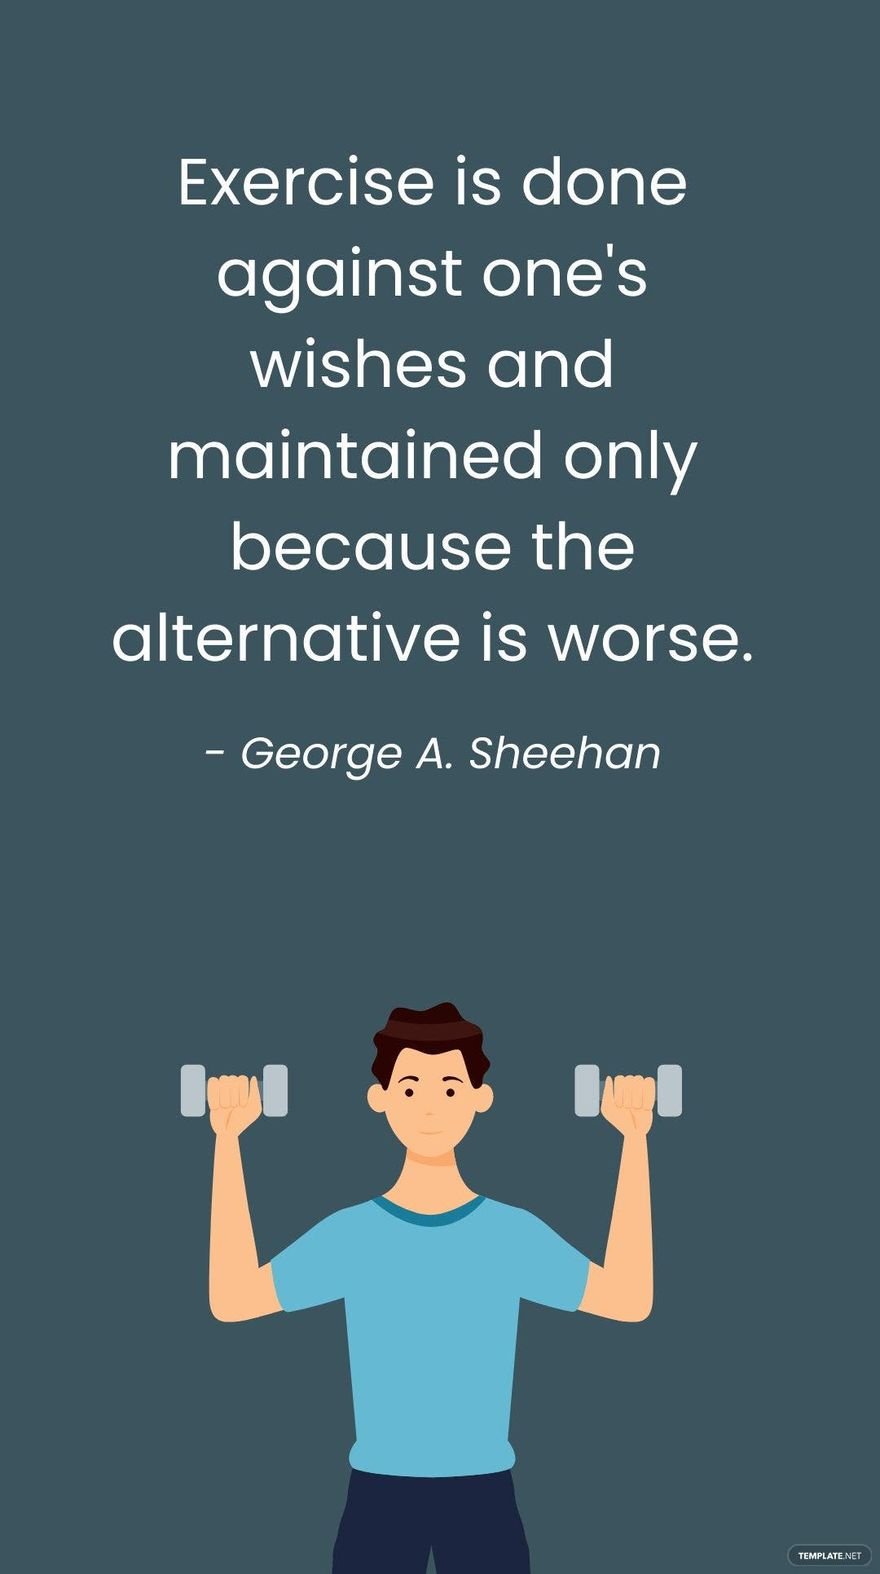 Free George A. Sheehan - Exercise is done against one's wishes and maintained only because the alternative is worse. in JPG